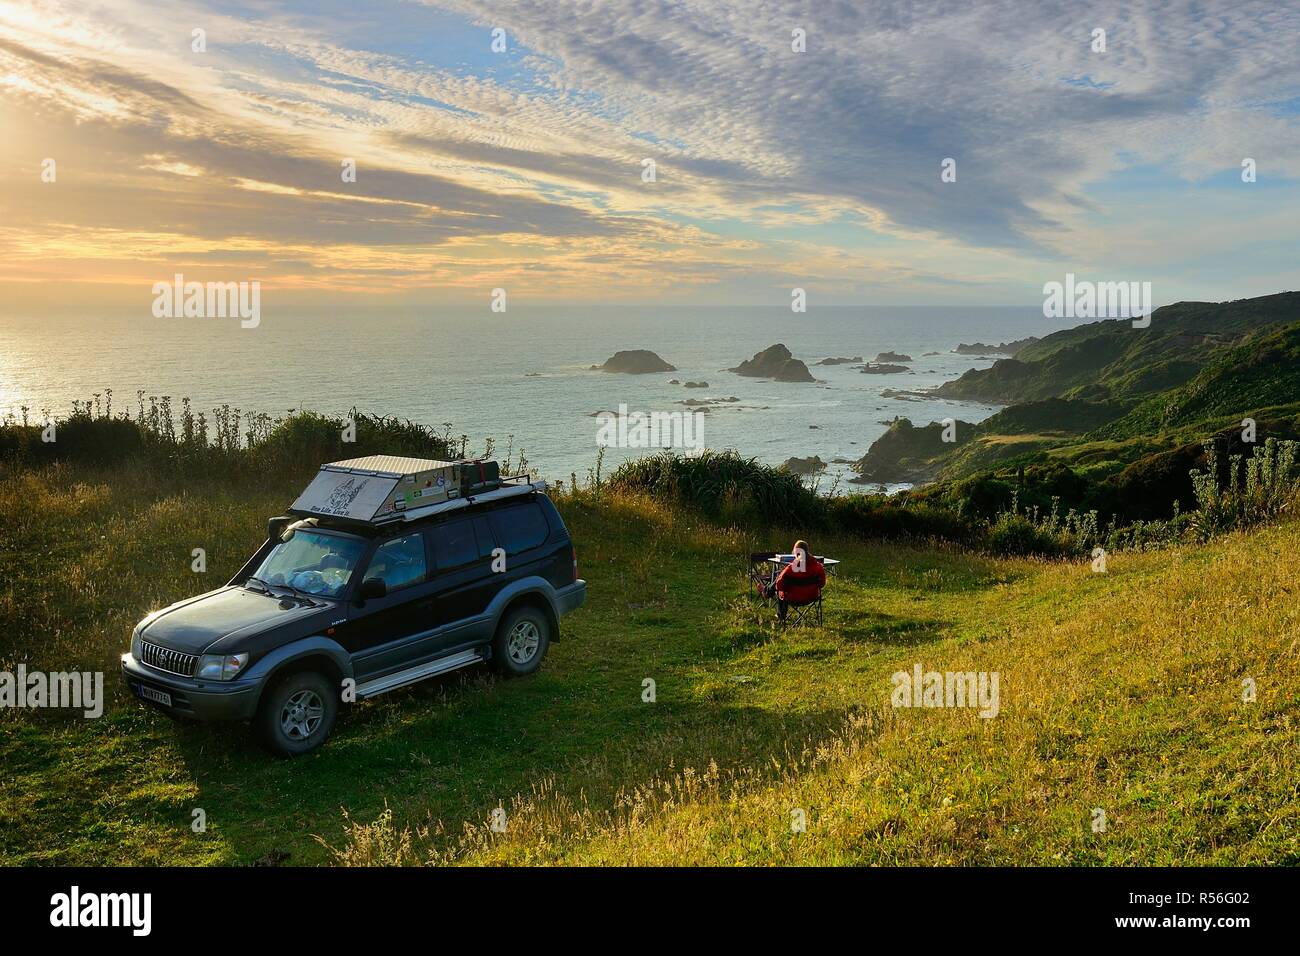 Woman sitting with off-road vehicle at the coast, Pacific, Pumillahue, Island Chiloé, Chile Stock Photo